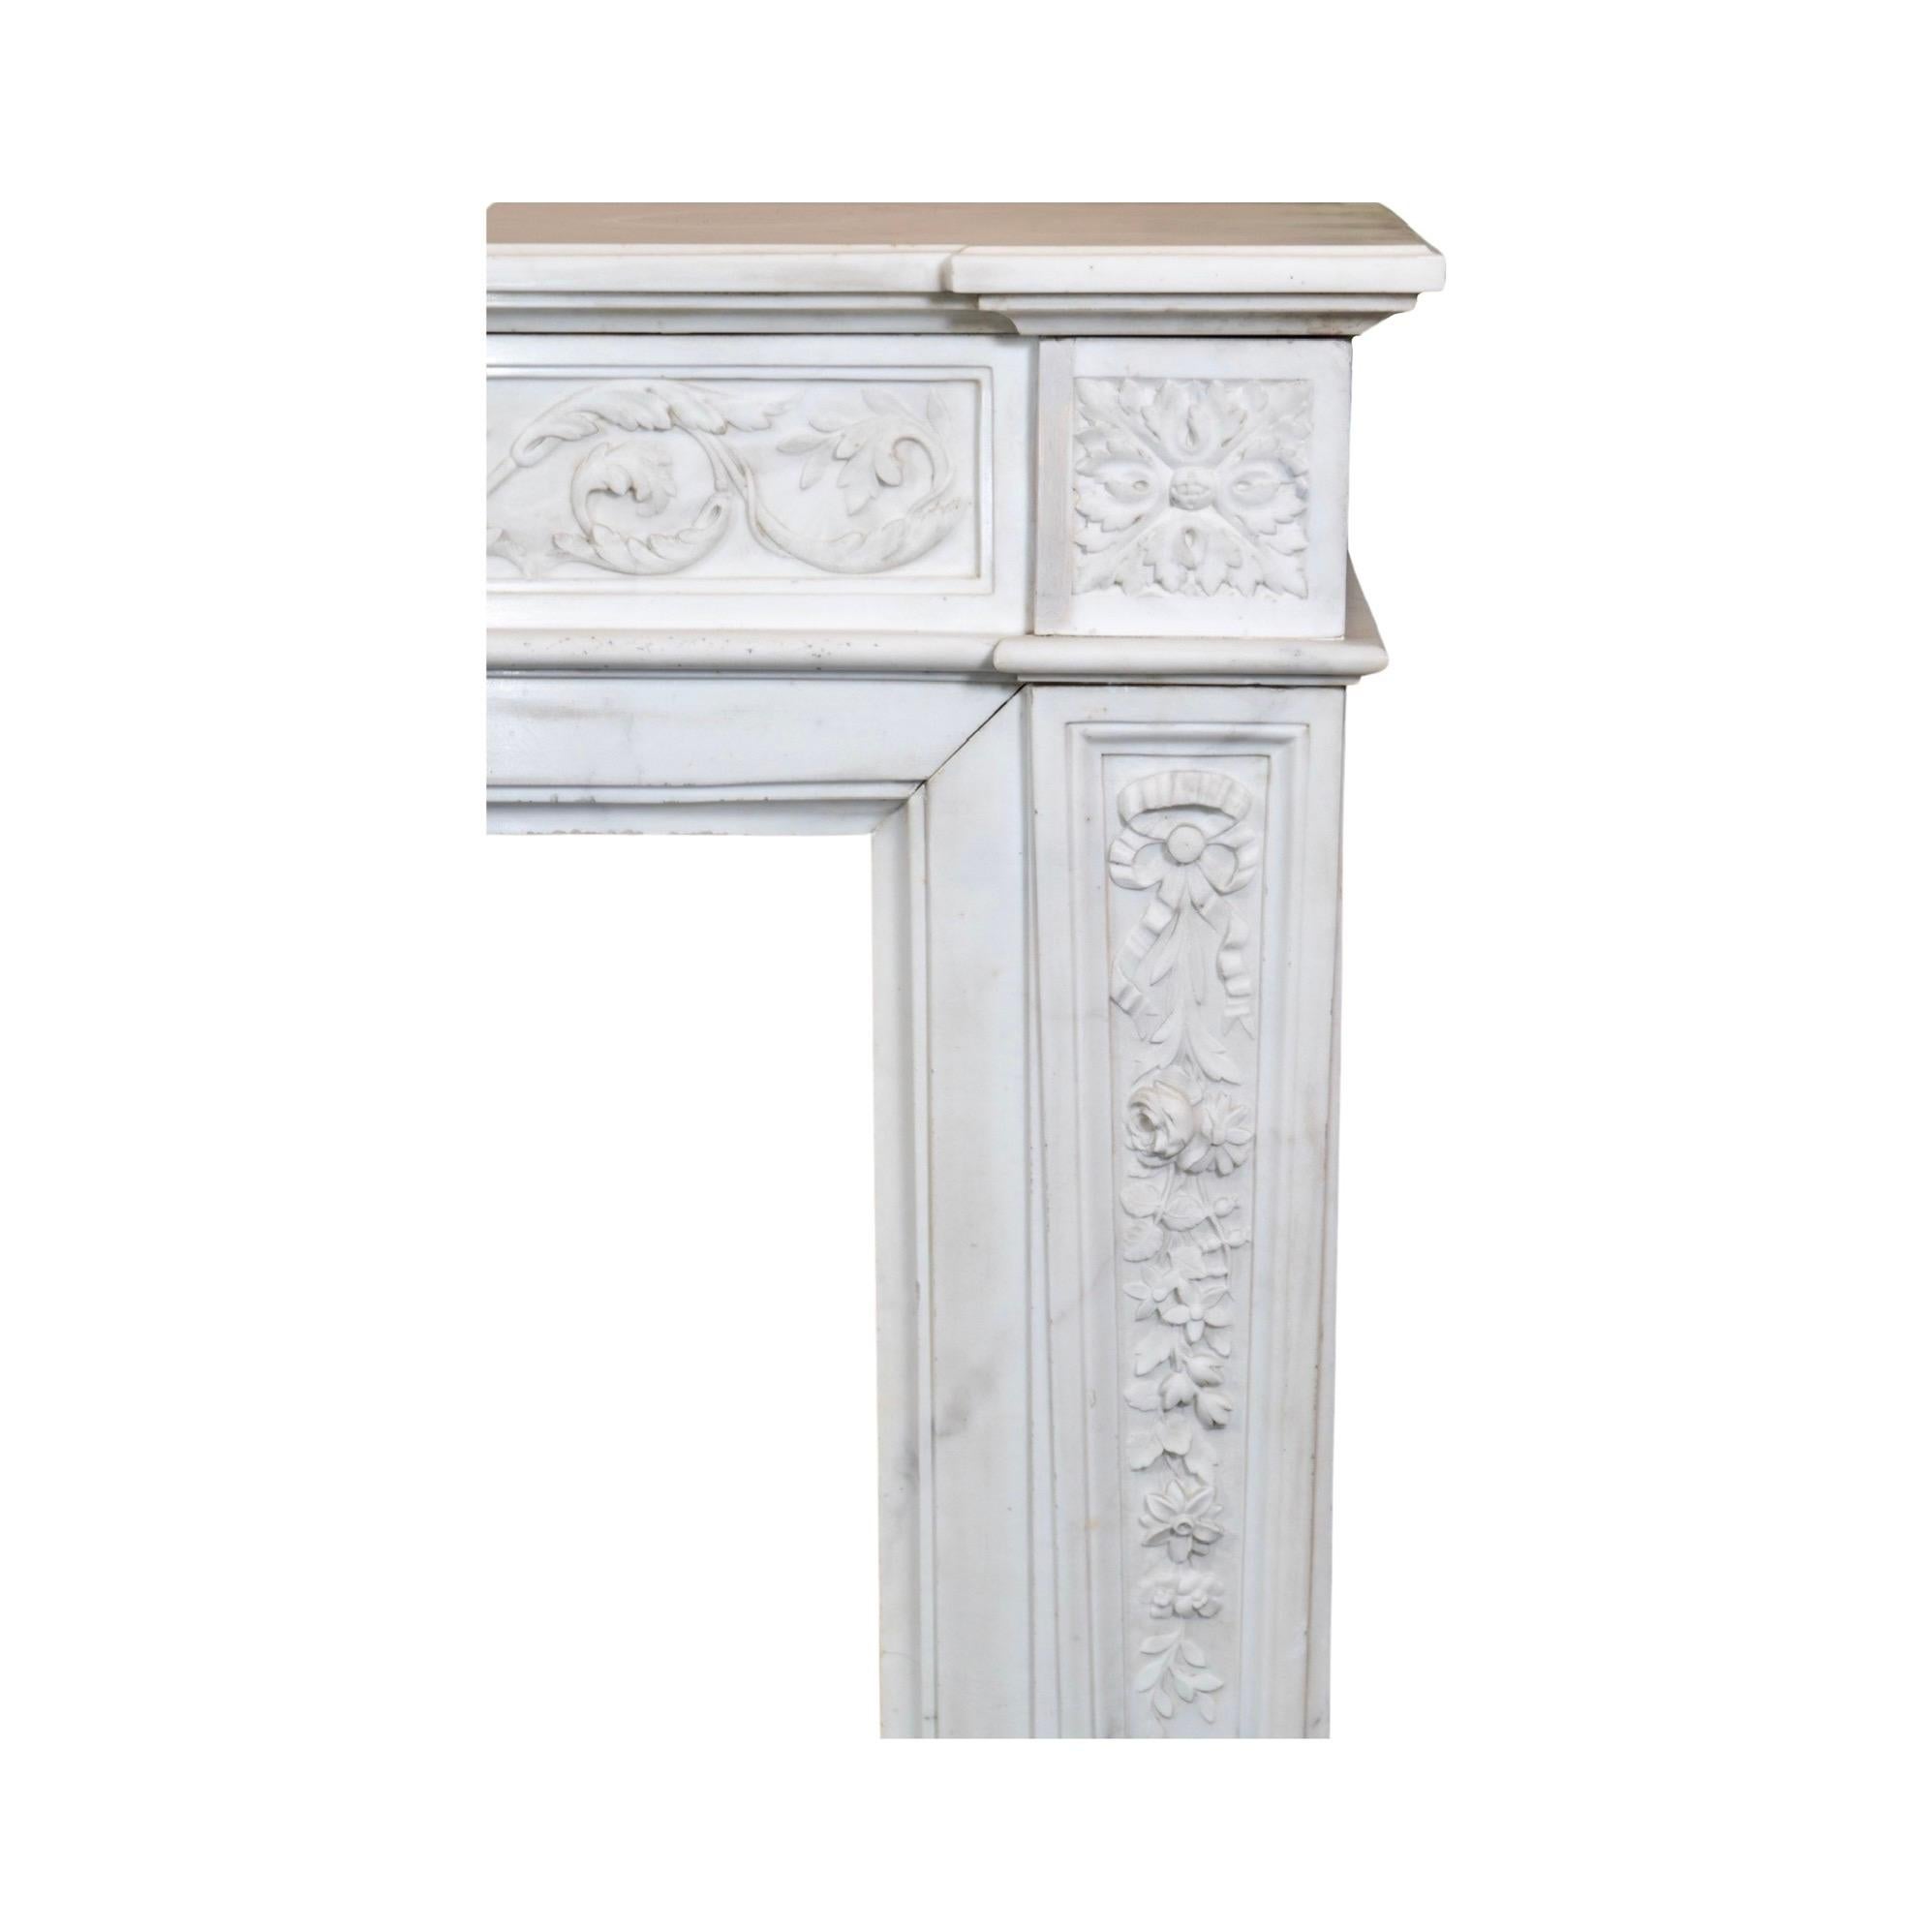 Mid-19th Century Carrara Marble Mantel from France For Sale 4